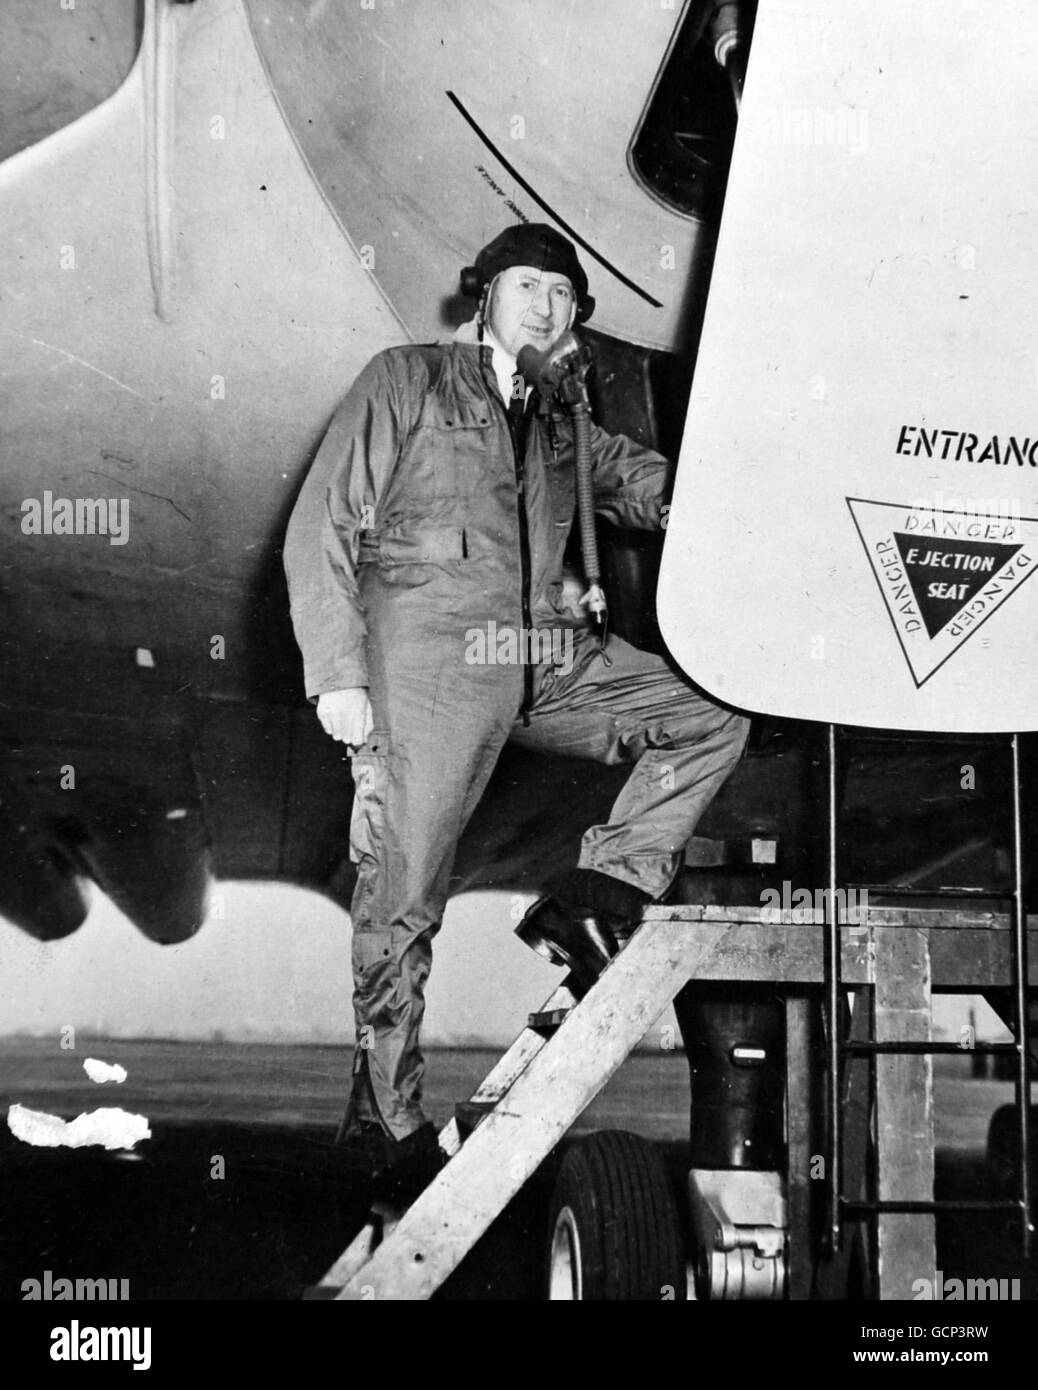 Mr. Duncan Sandys, Minister of Supply, is pictured as he left a Delta-wing Avro Vulcan jet bomber at Woodford Airport, near Manchester on March 13th 1954 after a flight during which he took over the aircraft's controls. The Minister made the flight, over the Isle of Wight and back by way of Holyhead, during a visit to the works of A.V. Roe and Co., Ltd., the aircraft's builders. The Vulcan, one of Britain's latest jet bombers, is believed to have reached more than 500 mph during the flight. Stock Photo